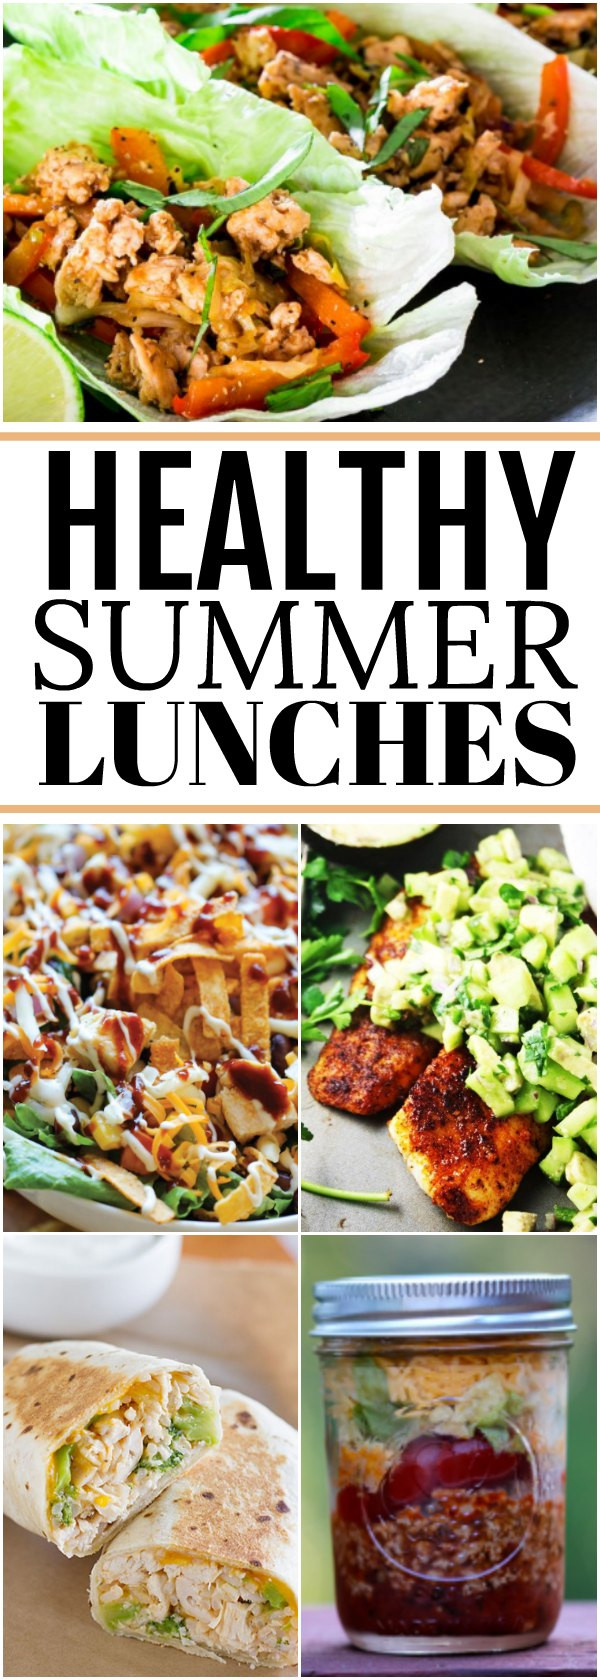 Healthy Summer Lunches
 Healthy lunch recipes Summer lunch recipes you can make